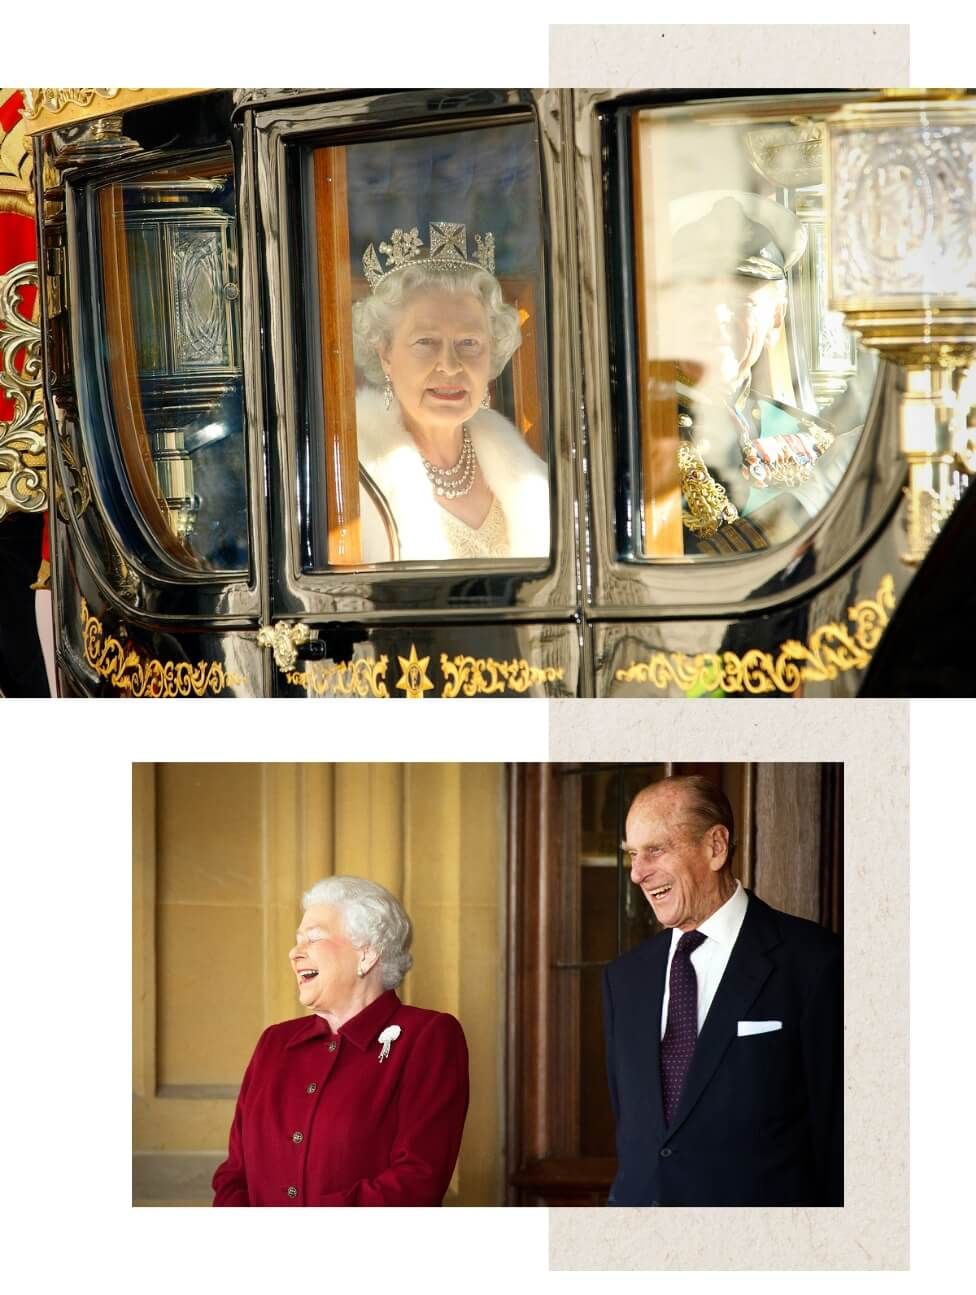 Two pictures of the Queen, one wearing a crown and riding in a carriage on her way to the state opening of parliament in 2002, the other standing next to Prince Philip, with the both of them laughing, in 2014